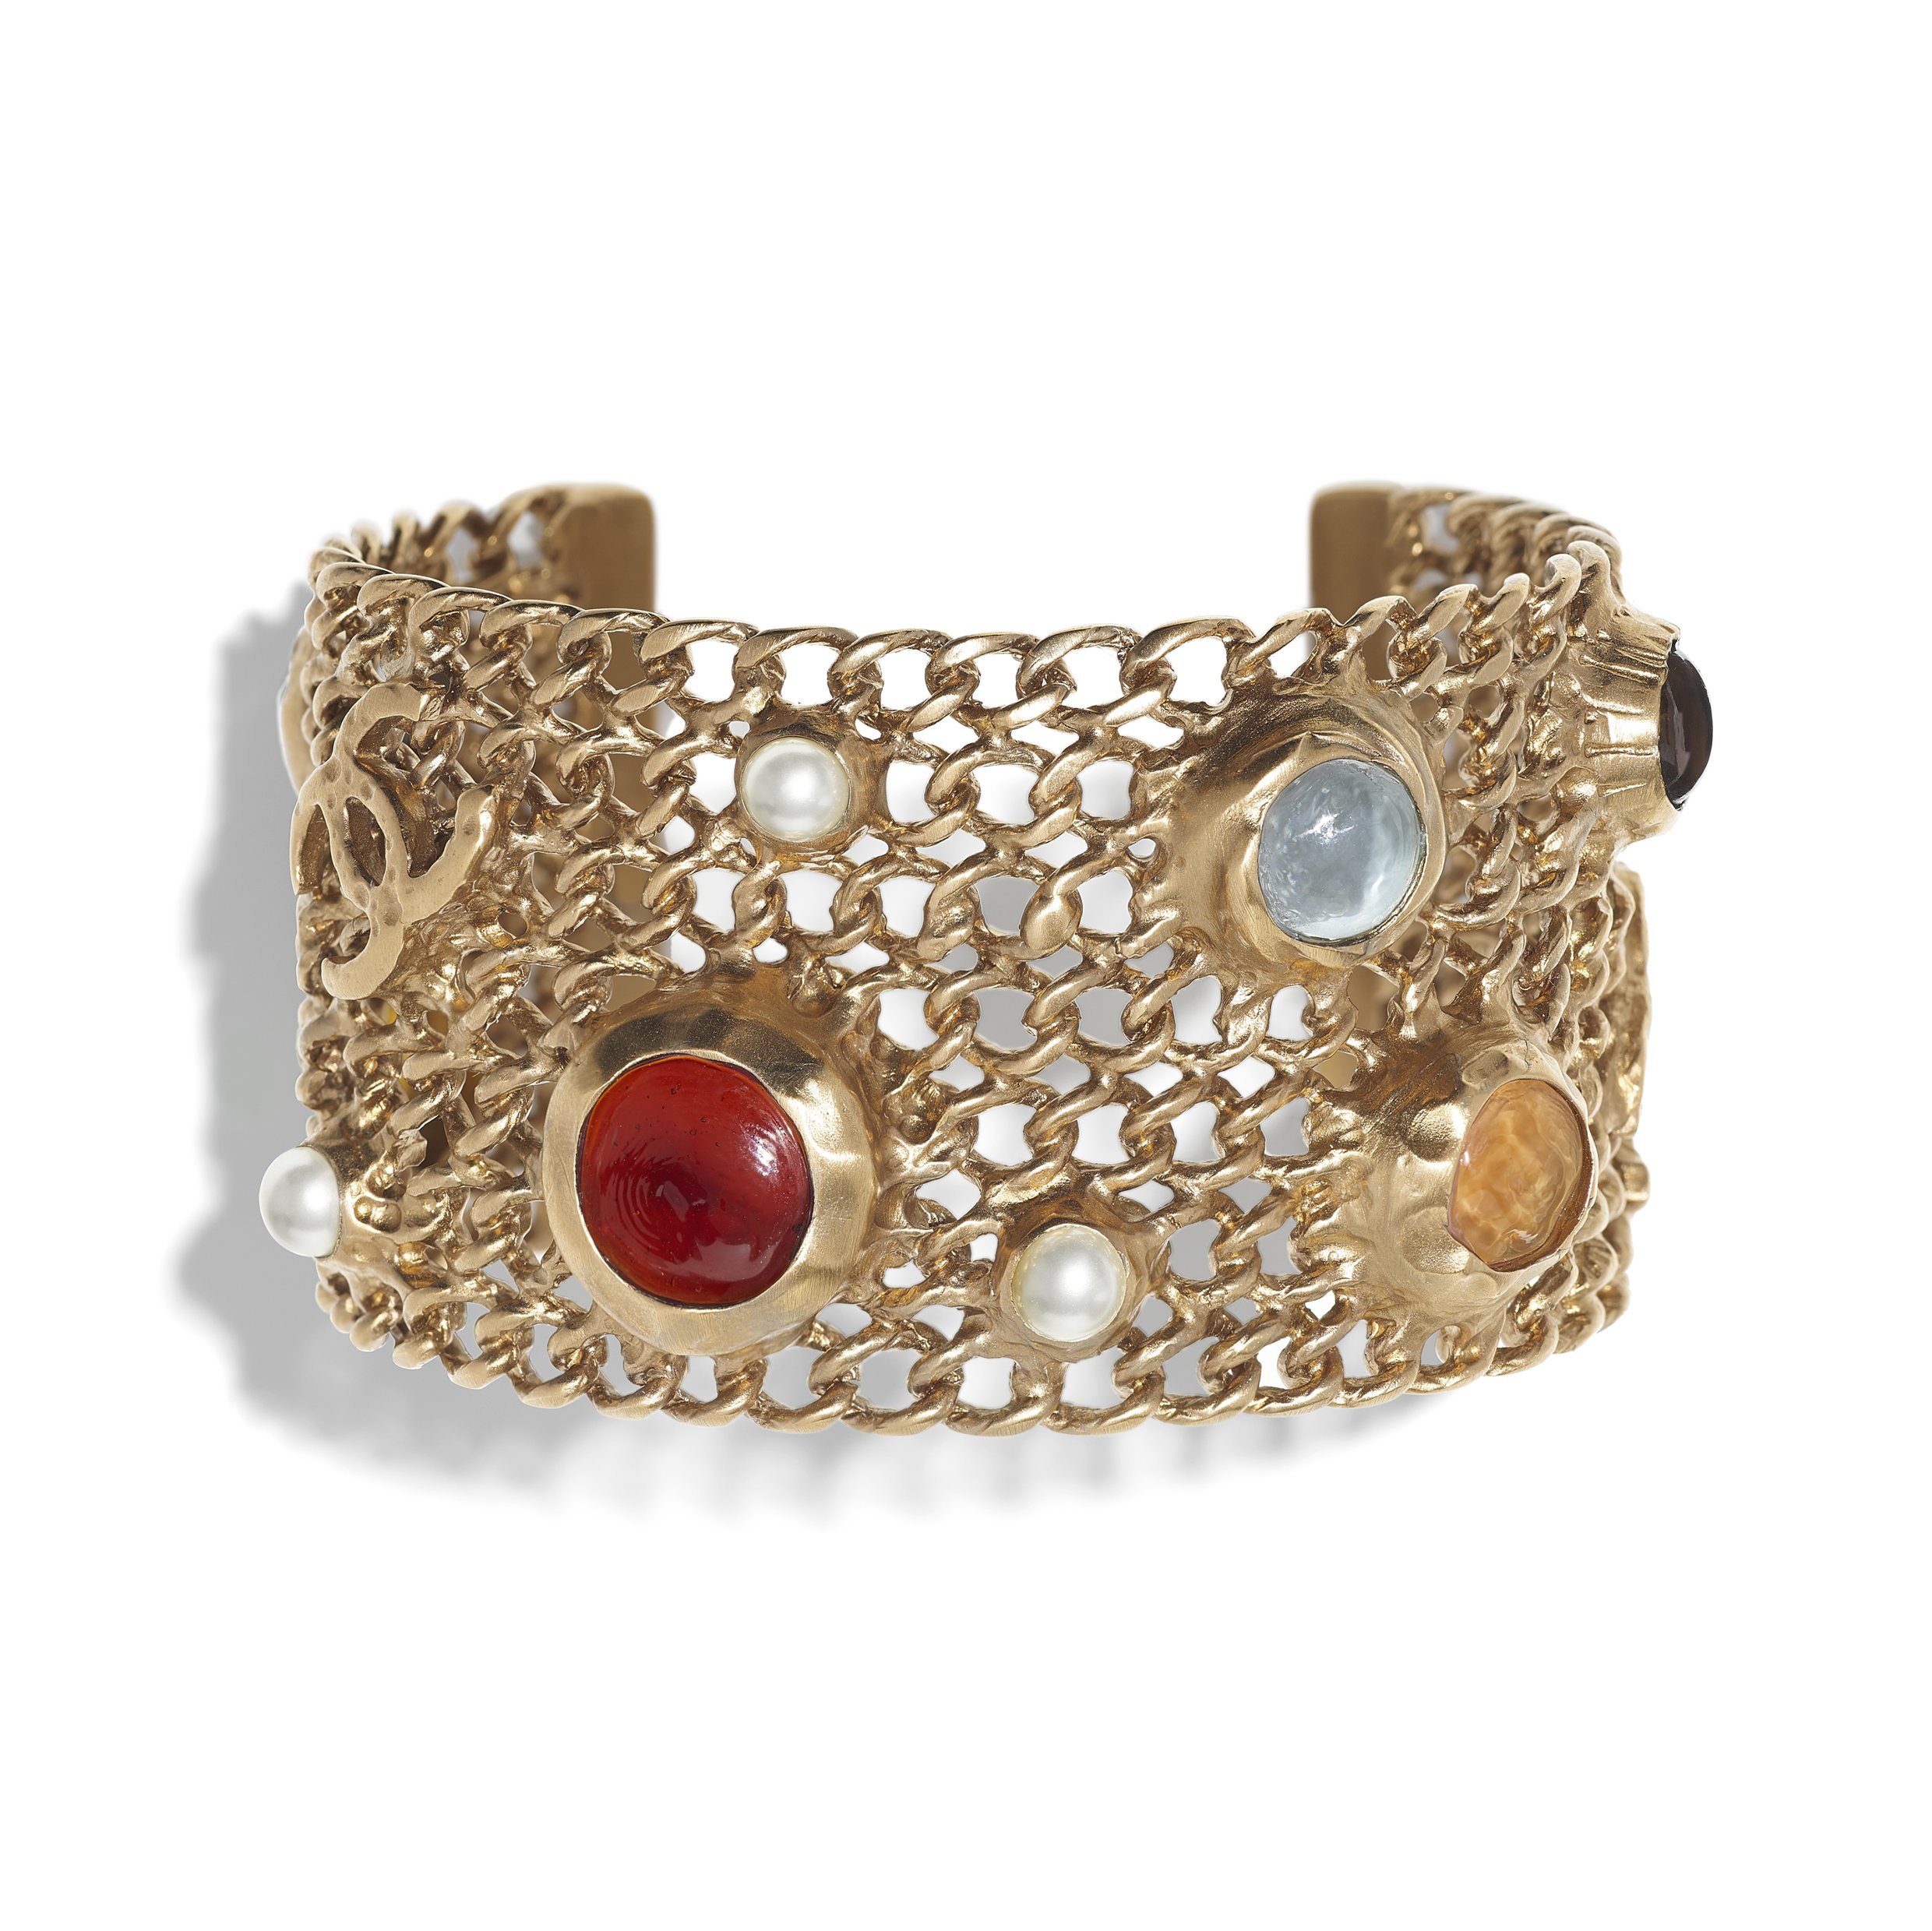 AB0269-Y47391-Z8821 - Cuff in gold metal with glass beads